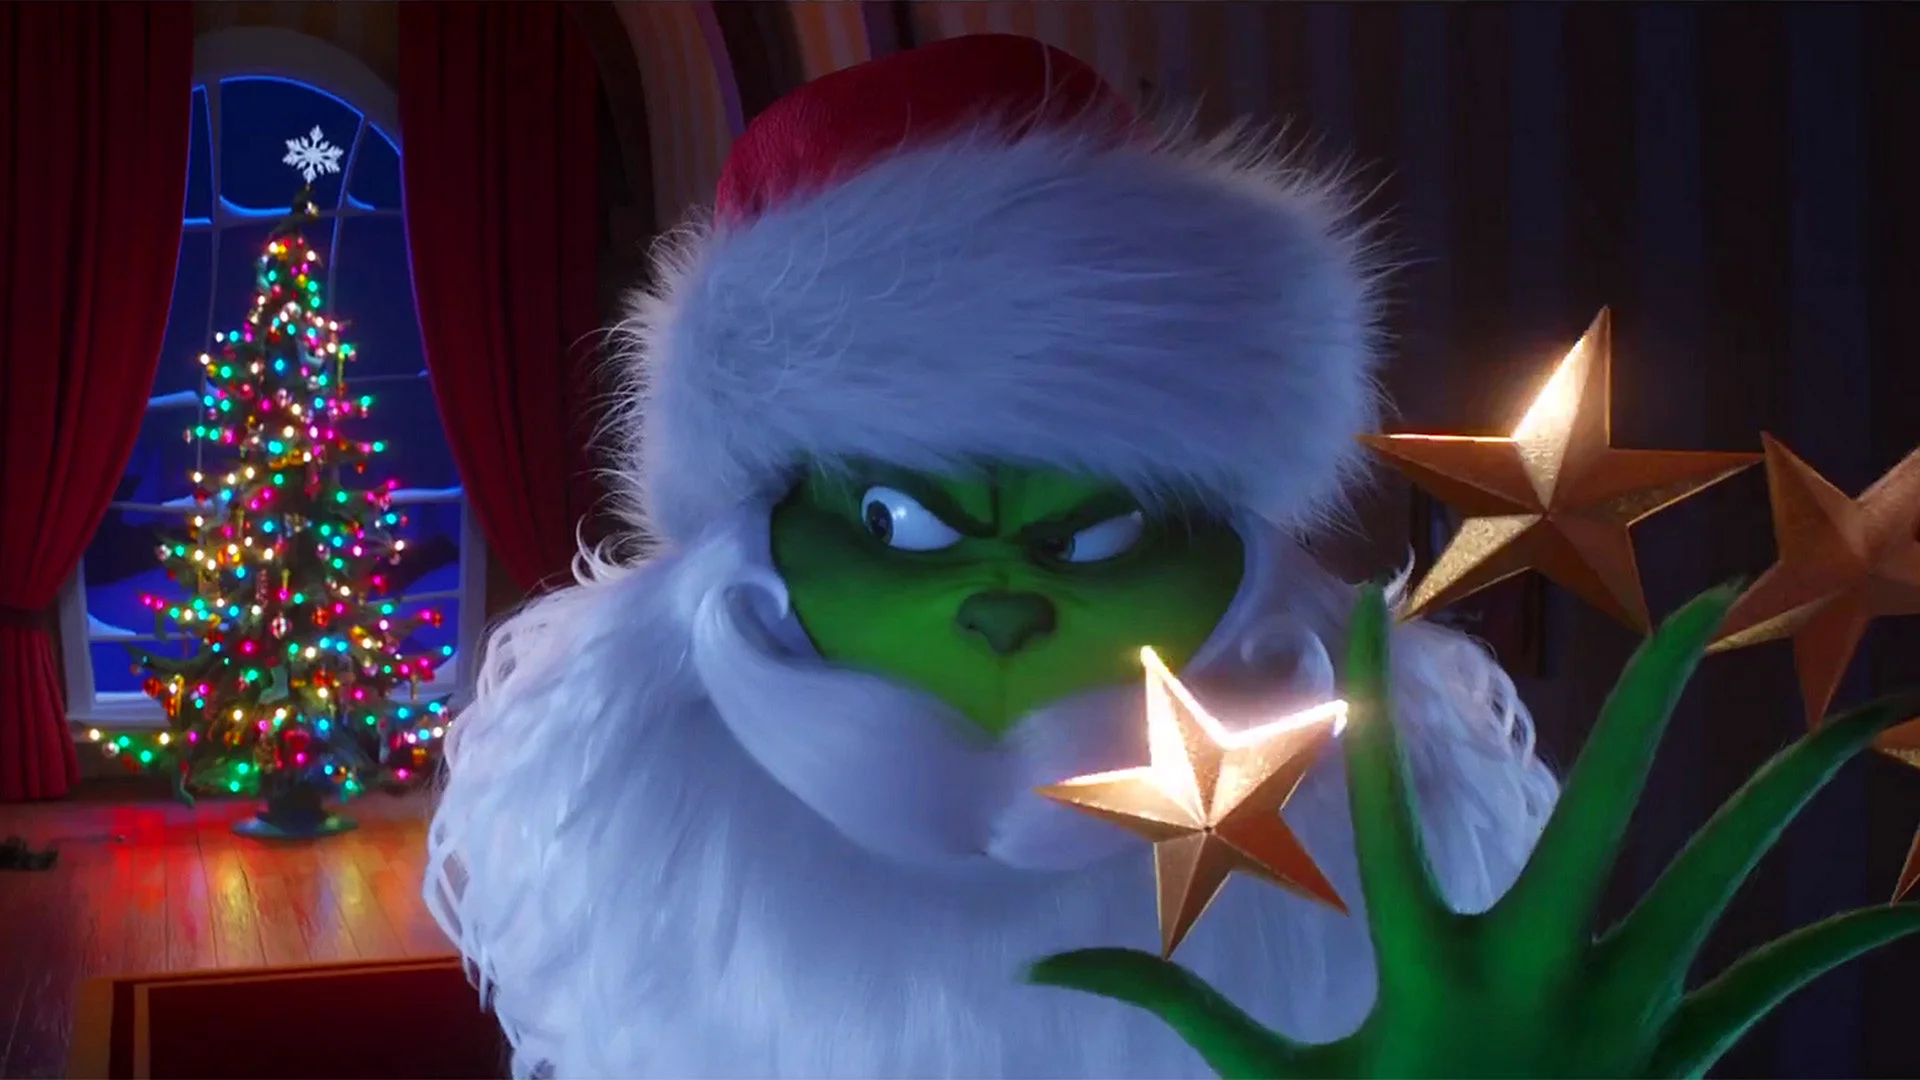 The Grinch 2018 Wallpaper